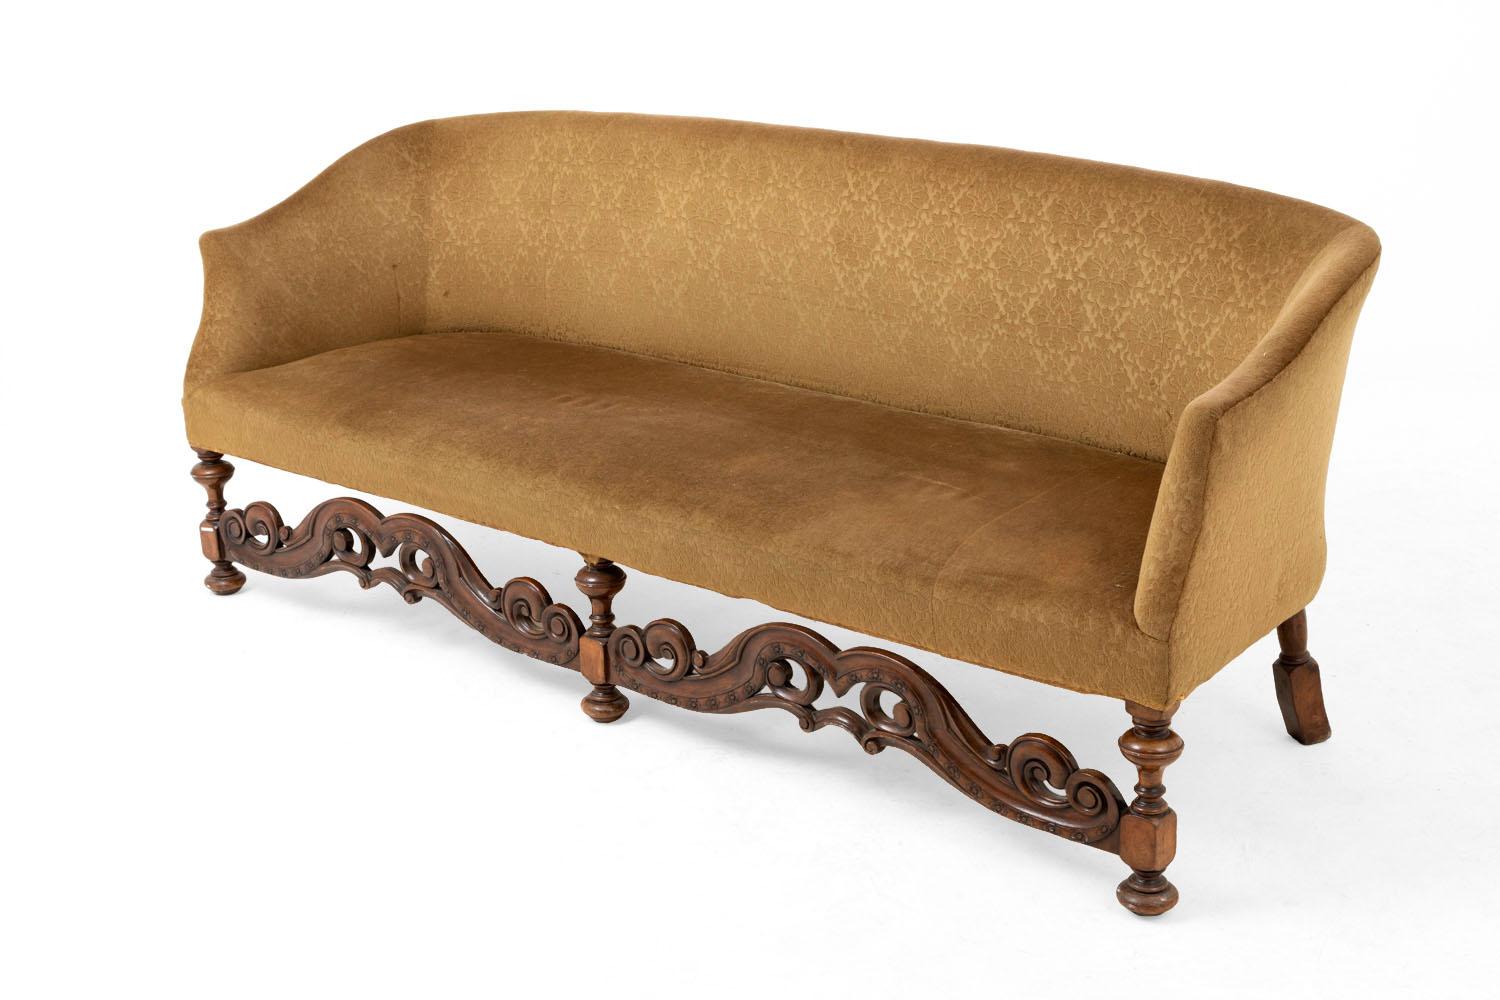 Large Jacobean English style sofa in carved and turned walnut standing on five moulded legs : the three front legs are in turning in bun and back legs have a superior part in column shape and inferior part in rectangular shape. Front legs are linked